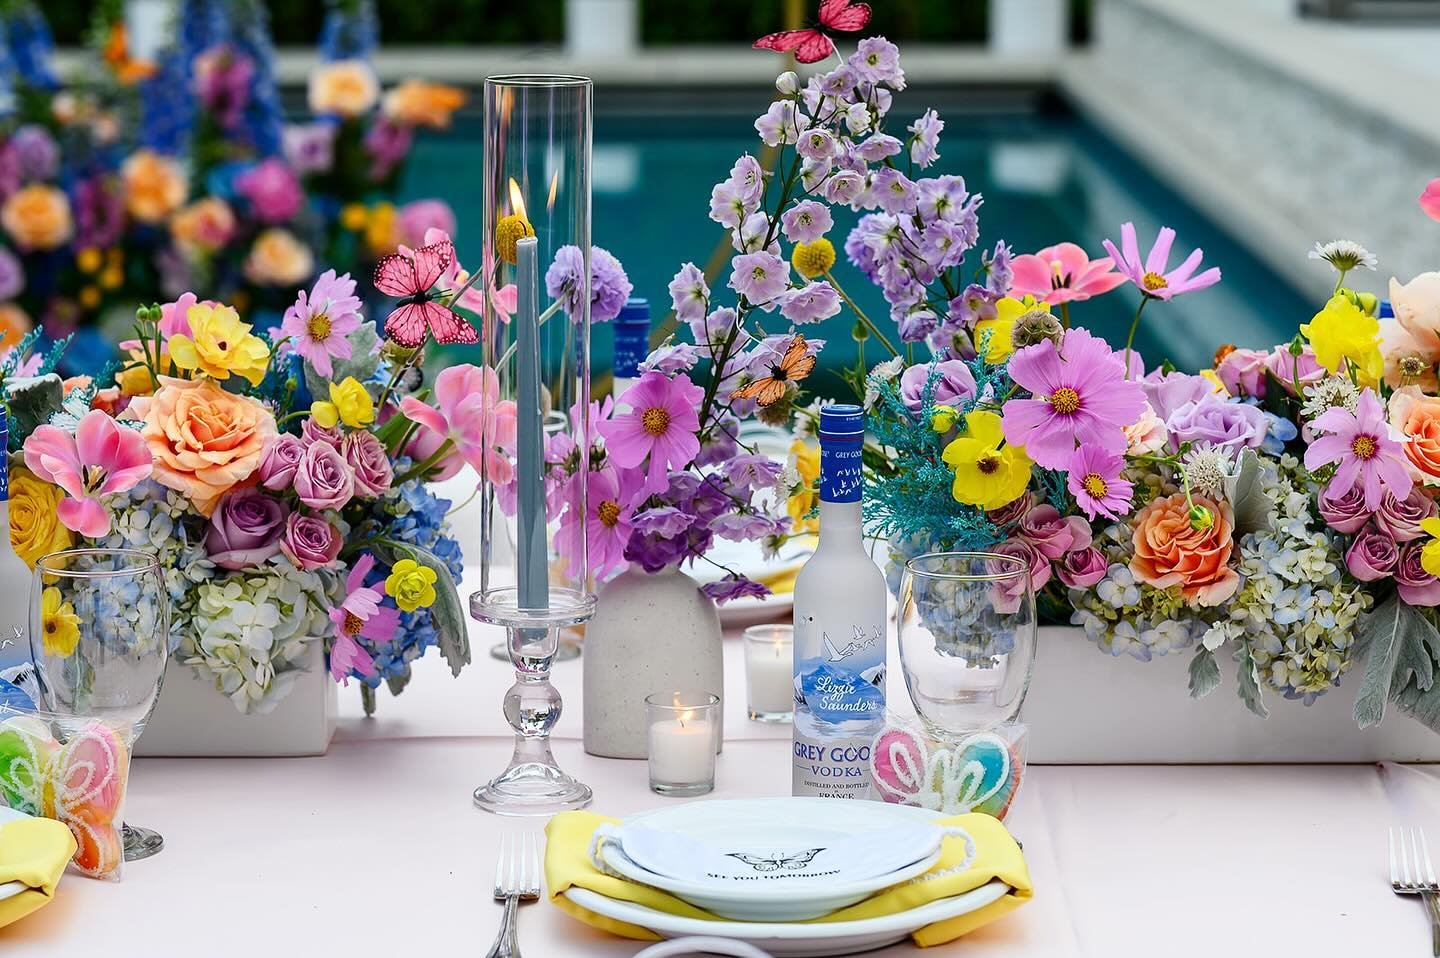 Sunday brunch inspo for entertaining at home! The @seeyoutomorrow surprise launch dinner took place in a beautiful backyard so let this serve as a reminder you don&rsquo;t always need an expensive venue. Two king tables and linens, 16 chairs and some